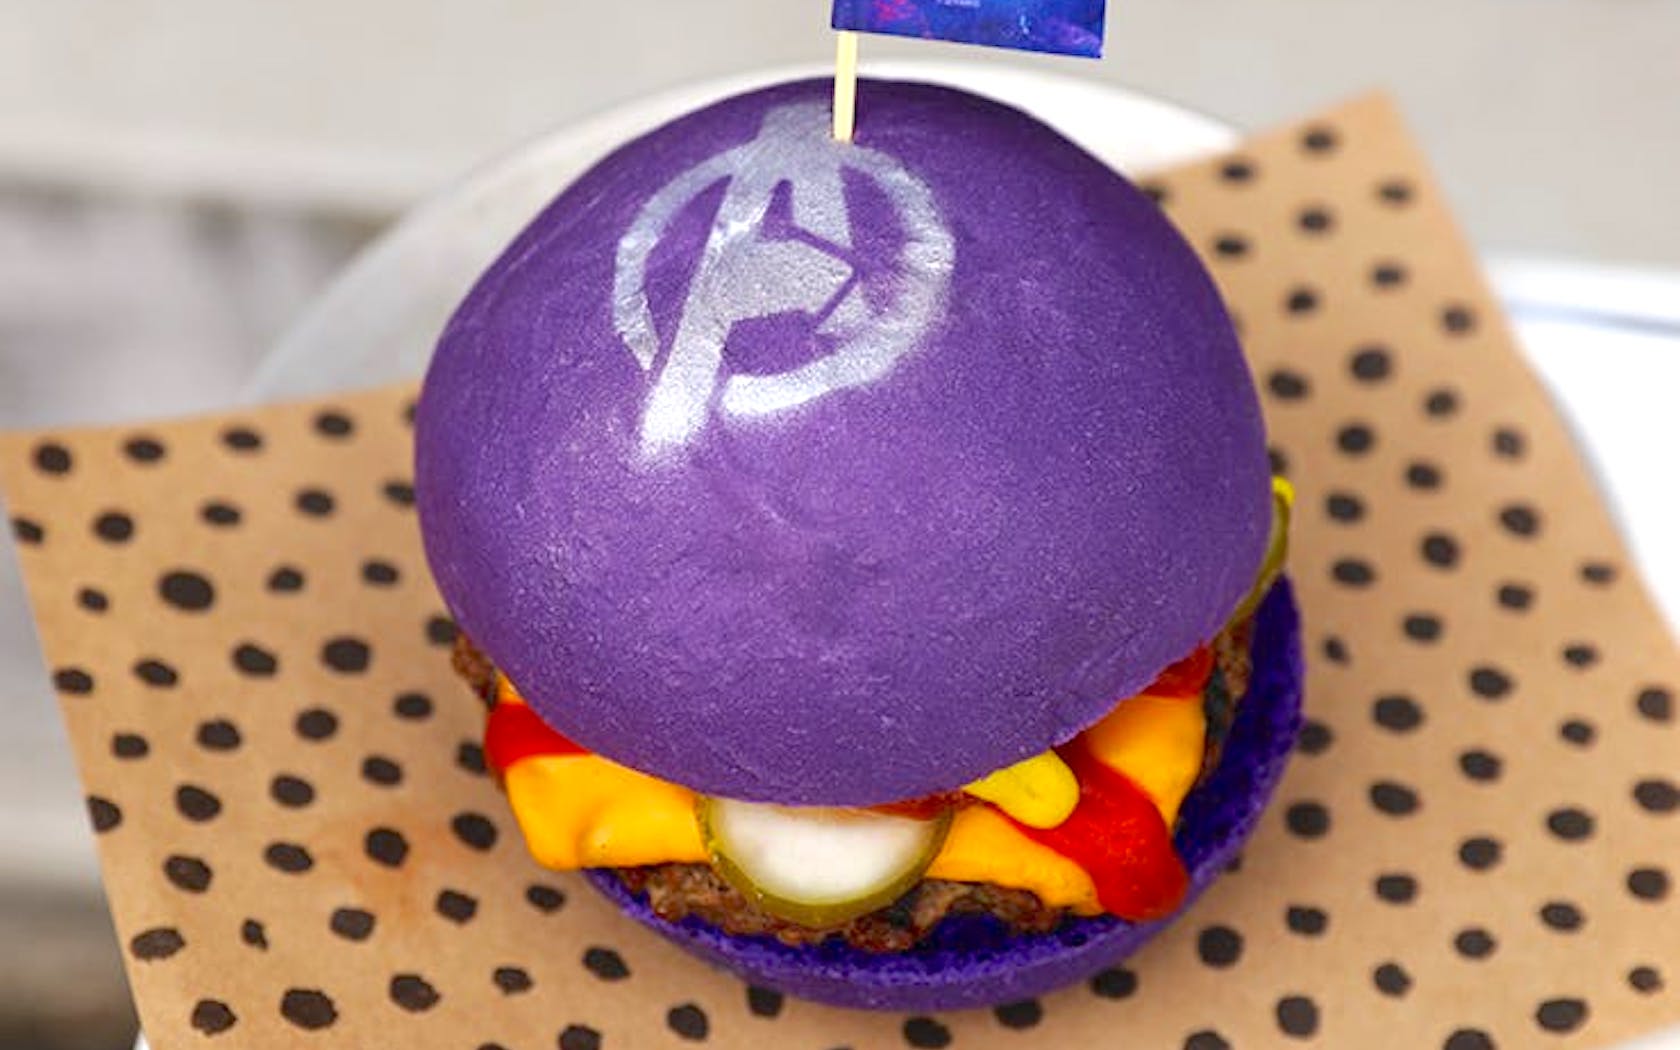 Chur Burger In Sydney Is Giving Away 3000 'Avengers' Burgers In August